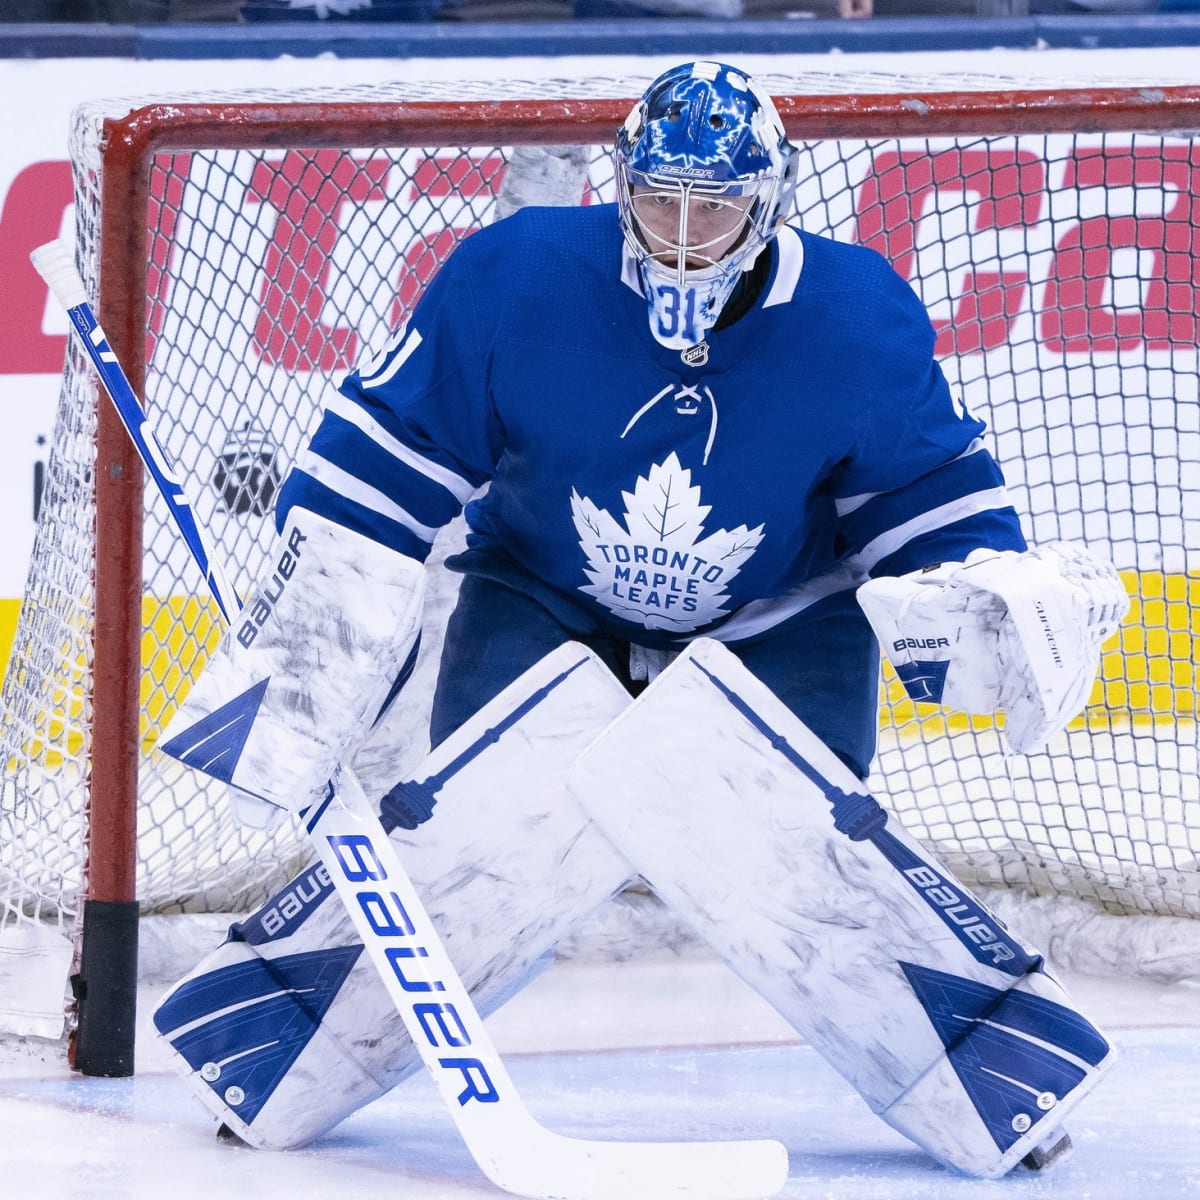 Toronto Maple Leafs: Frederik Andersen off to a Great Start